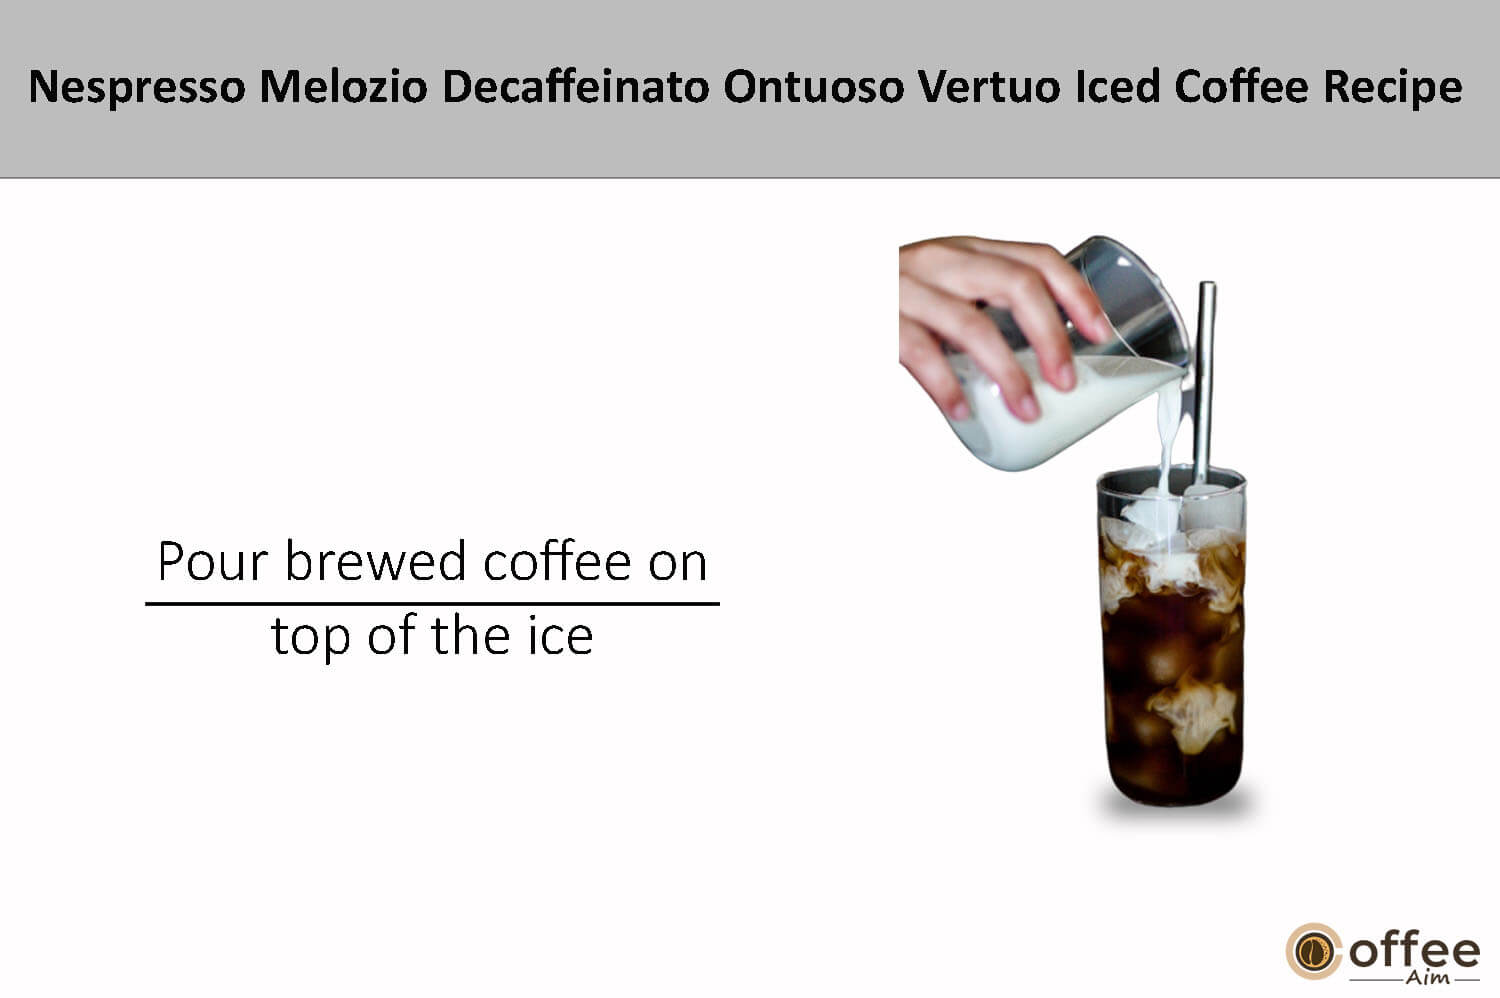 In this image i explain that Pour brewed coffee on top of the ice.